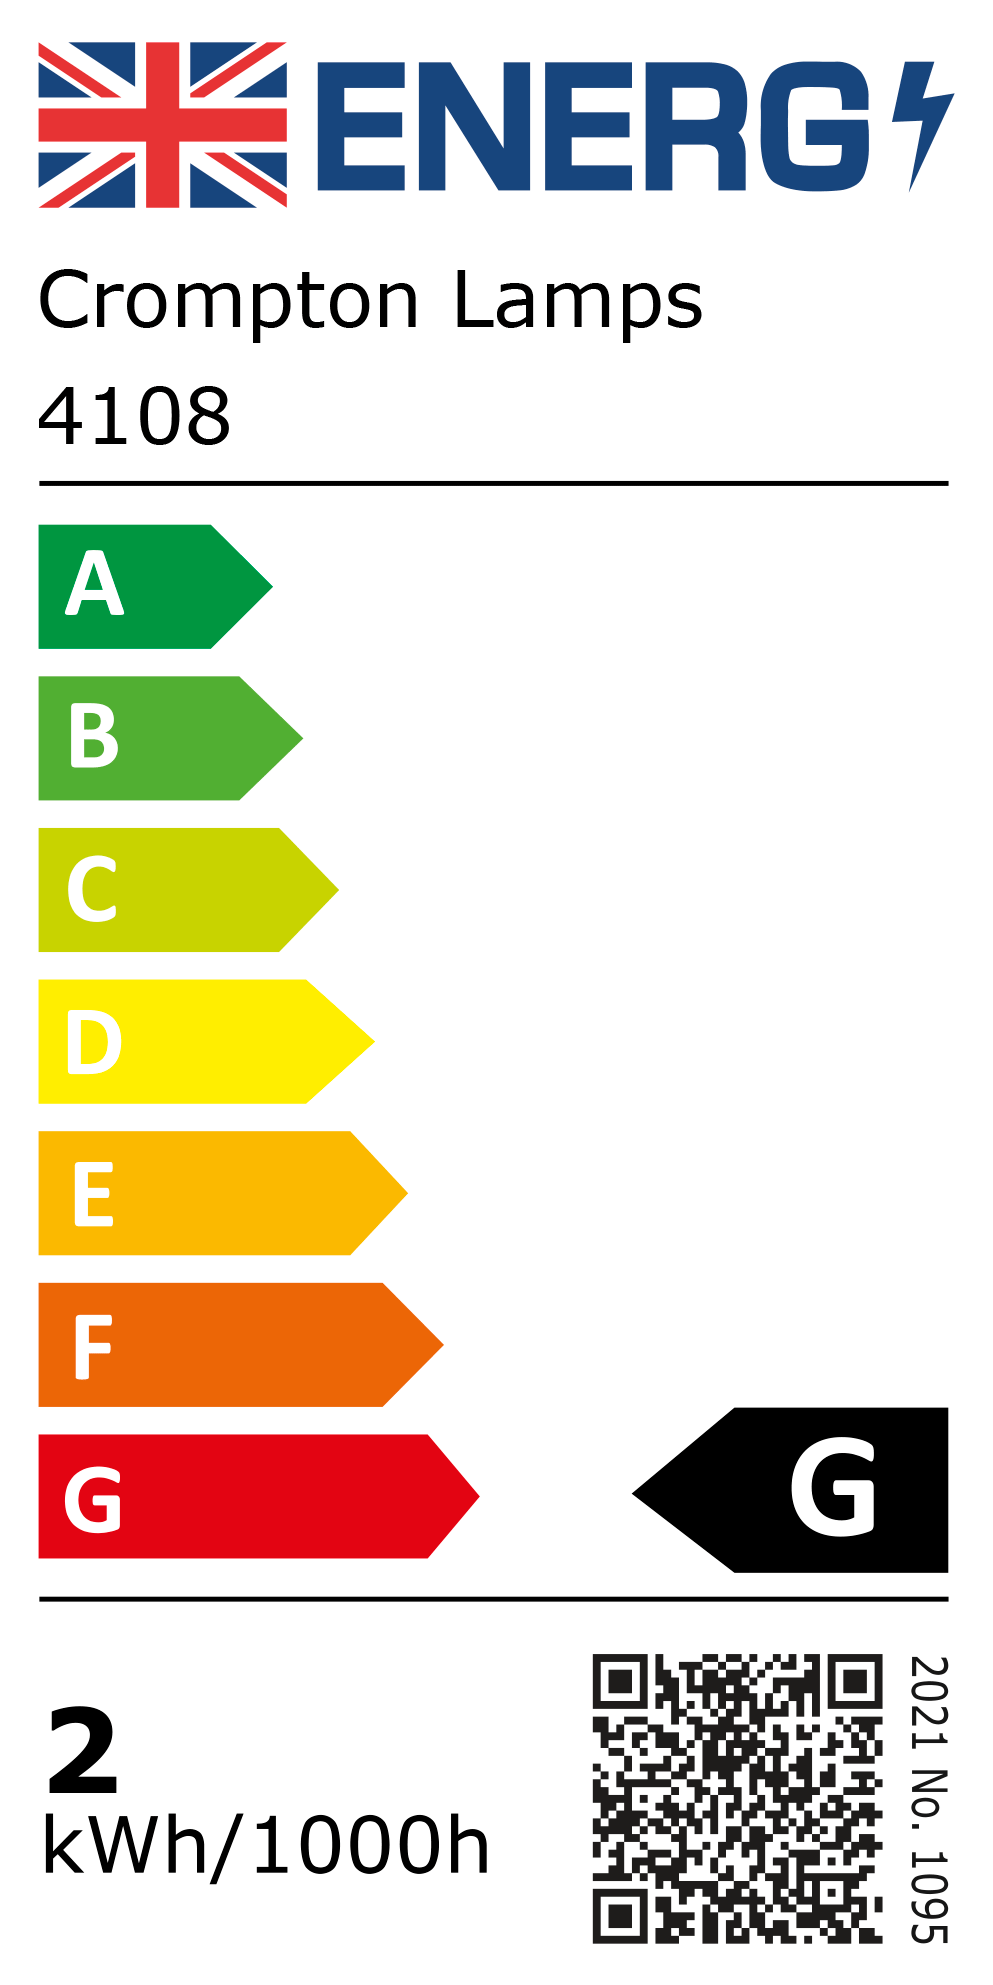 New 2021 Energy Rating Label: Stock Code 4108